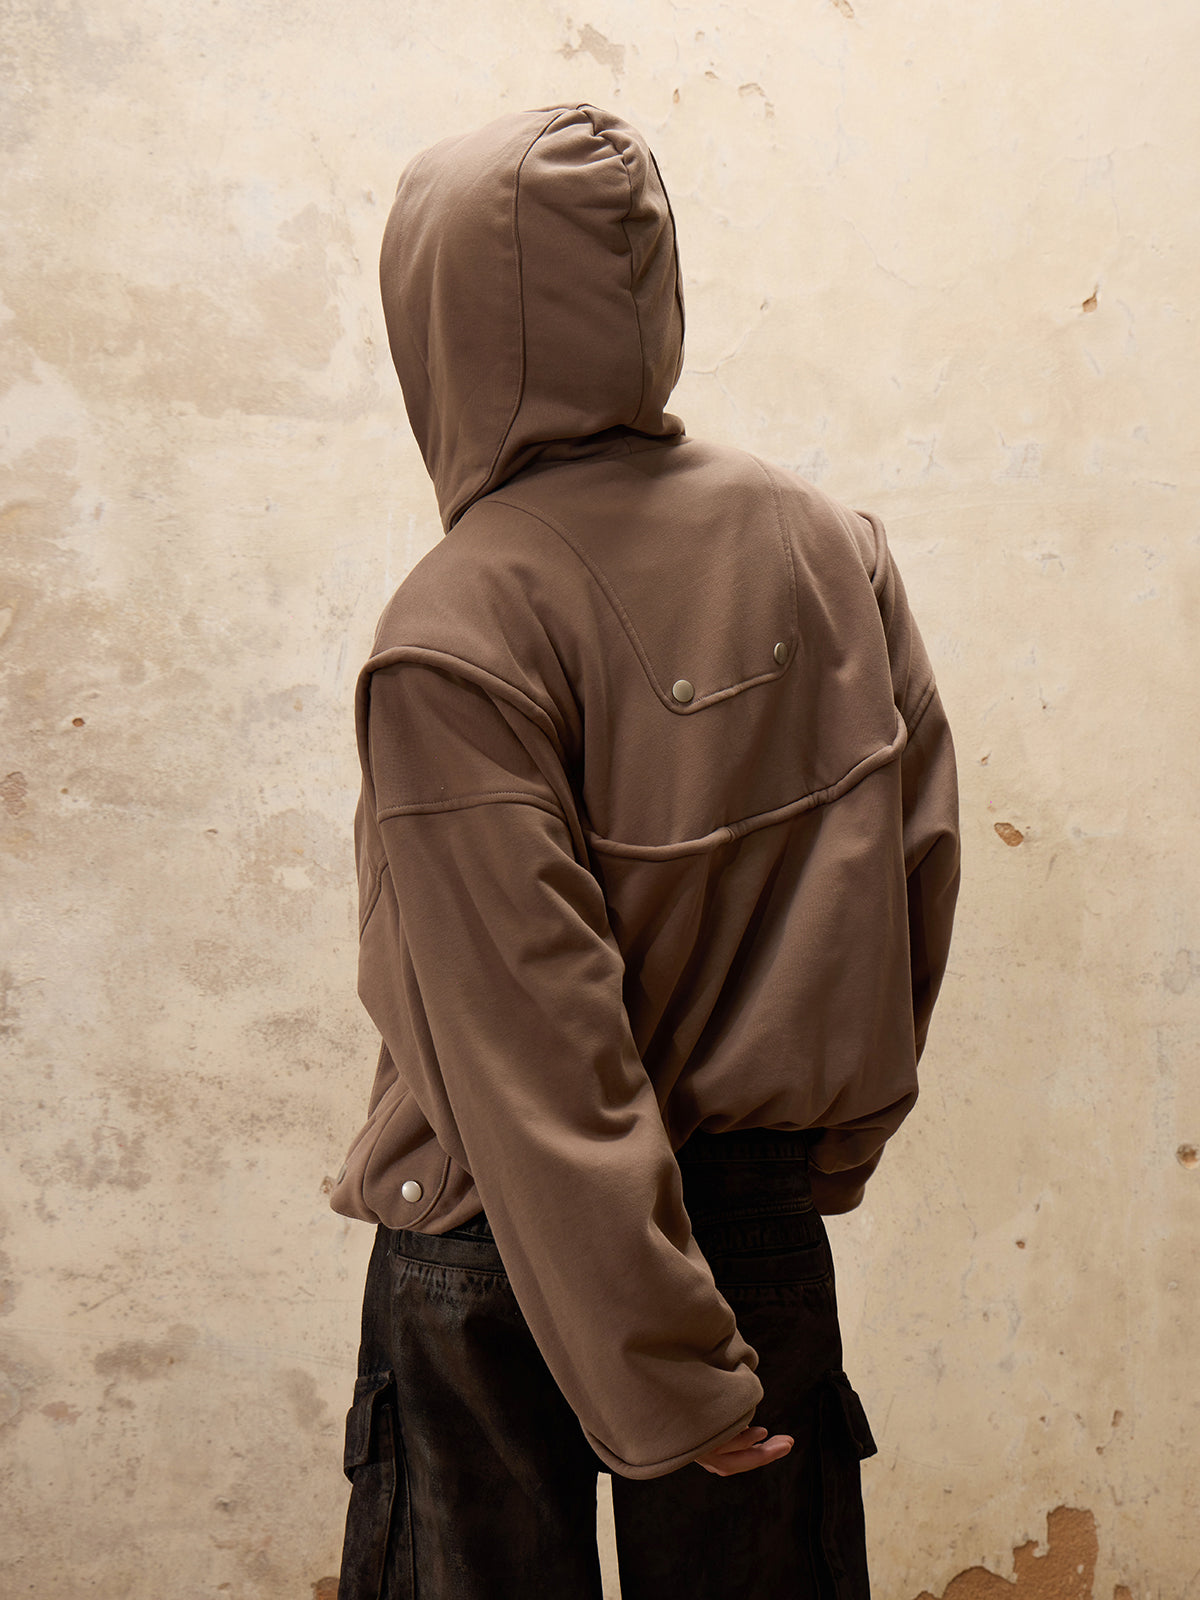 Personsoul Boom Hoodie – personsoul